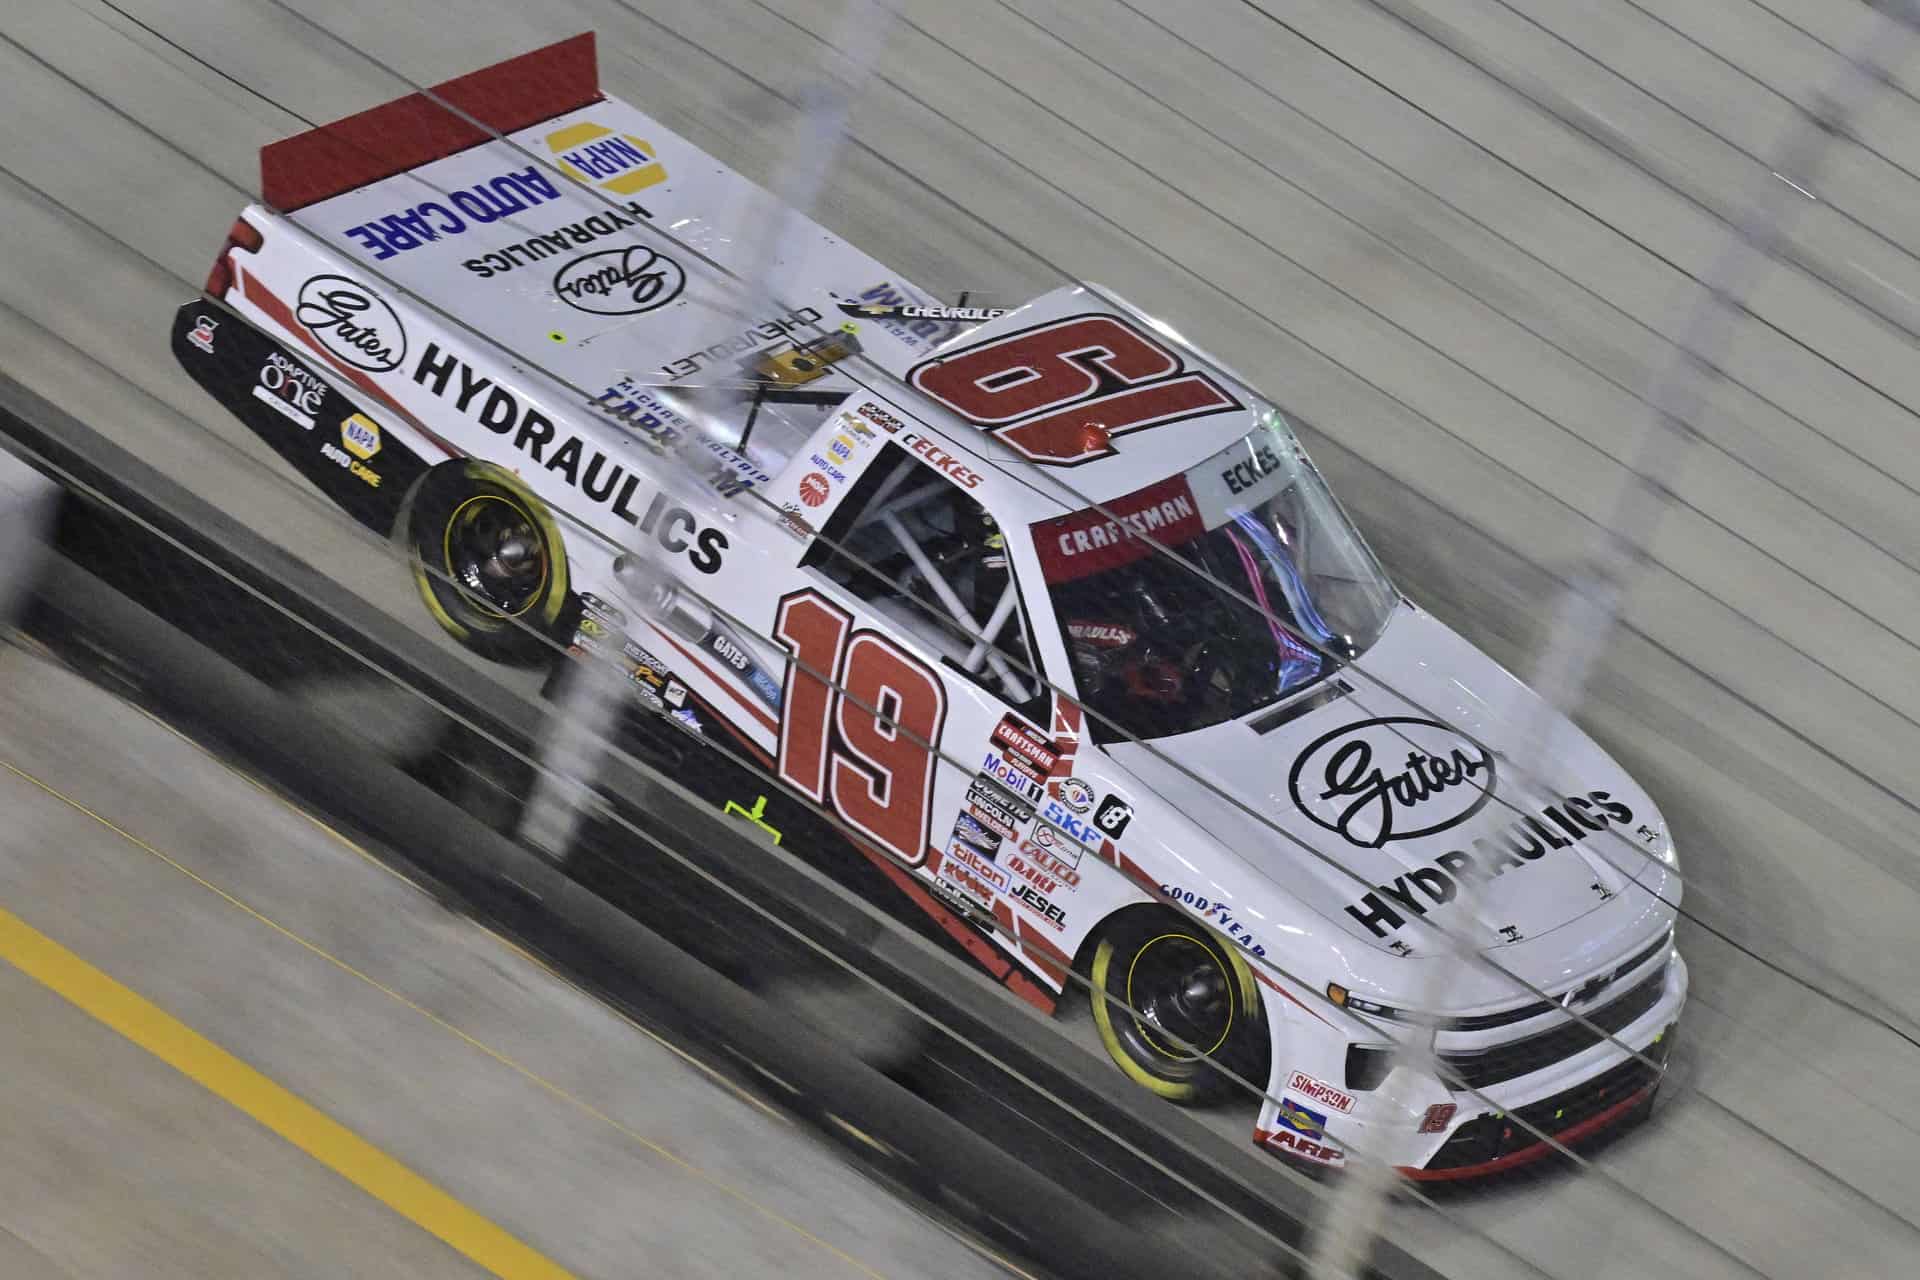 Lapped traffic ultimately cost Christian Eckes a chance at victory in the NASCAR Craftsman Truck Series race at Bristol Motor Speedway.